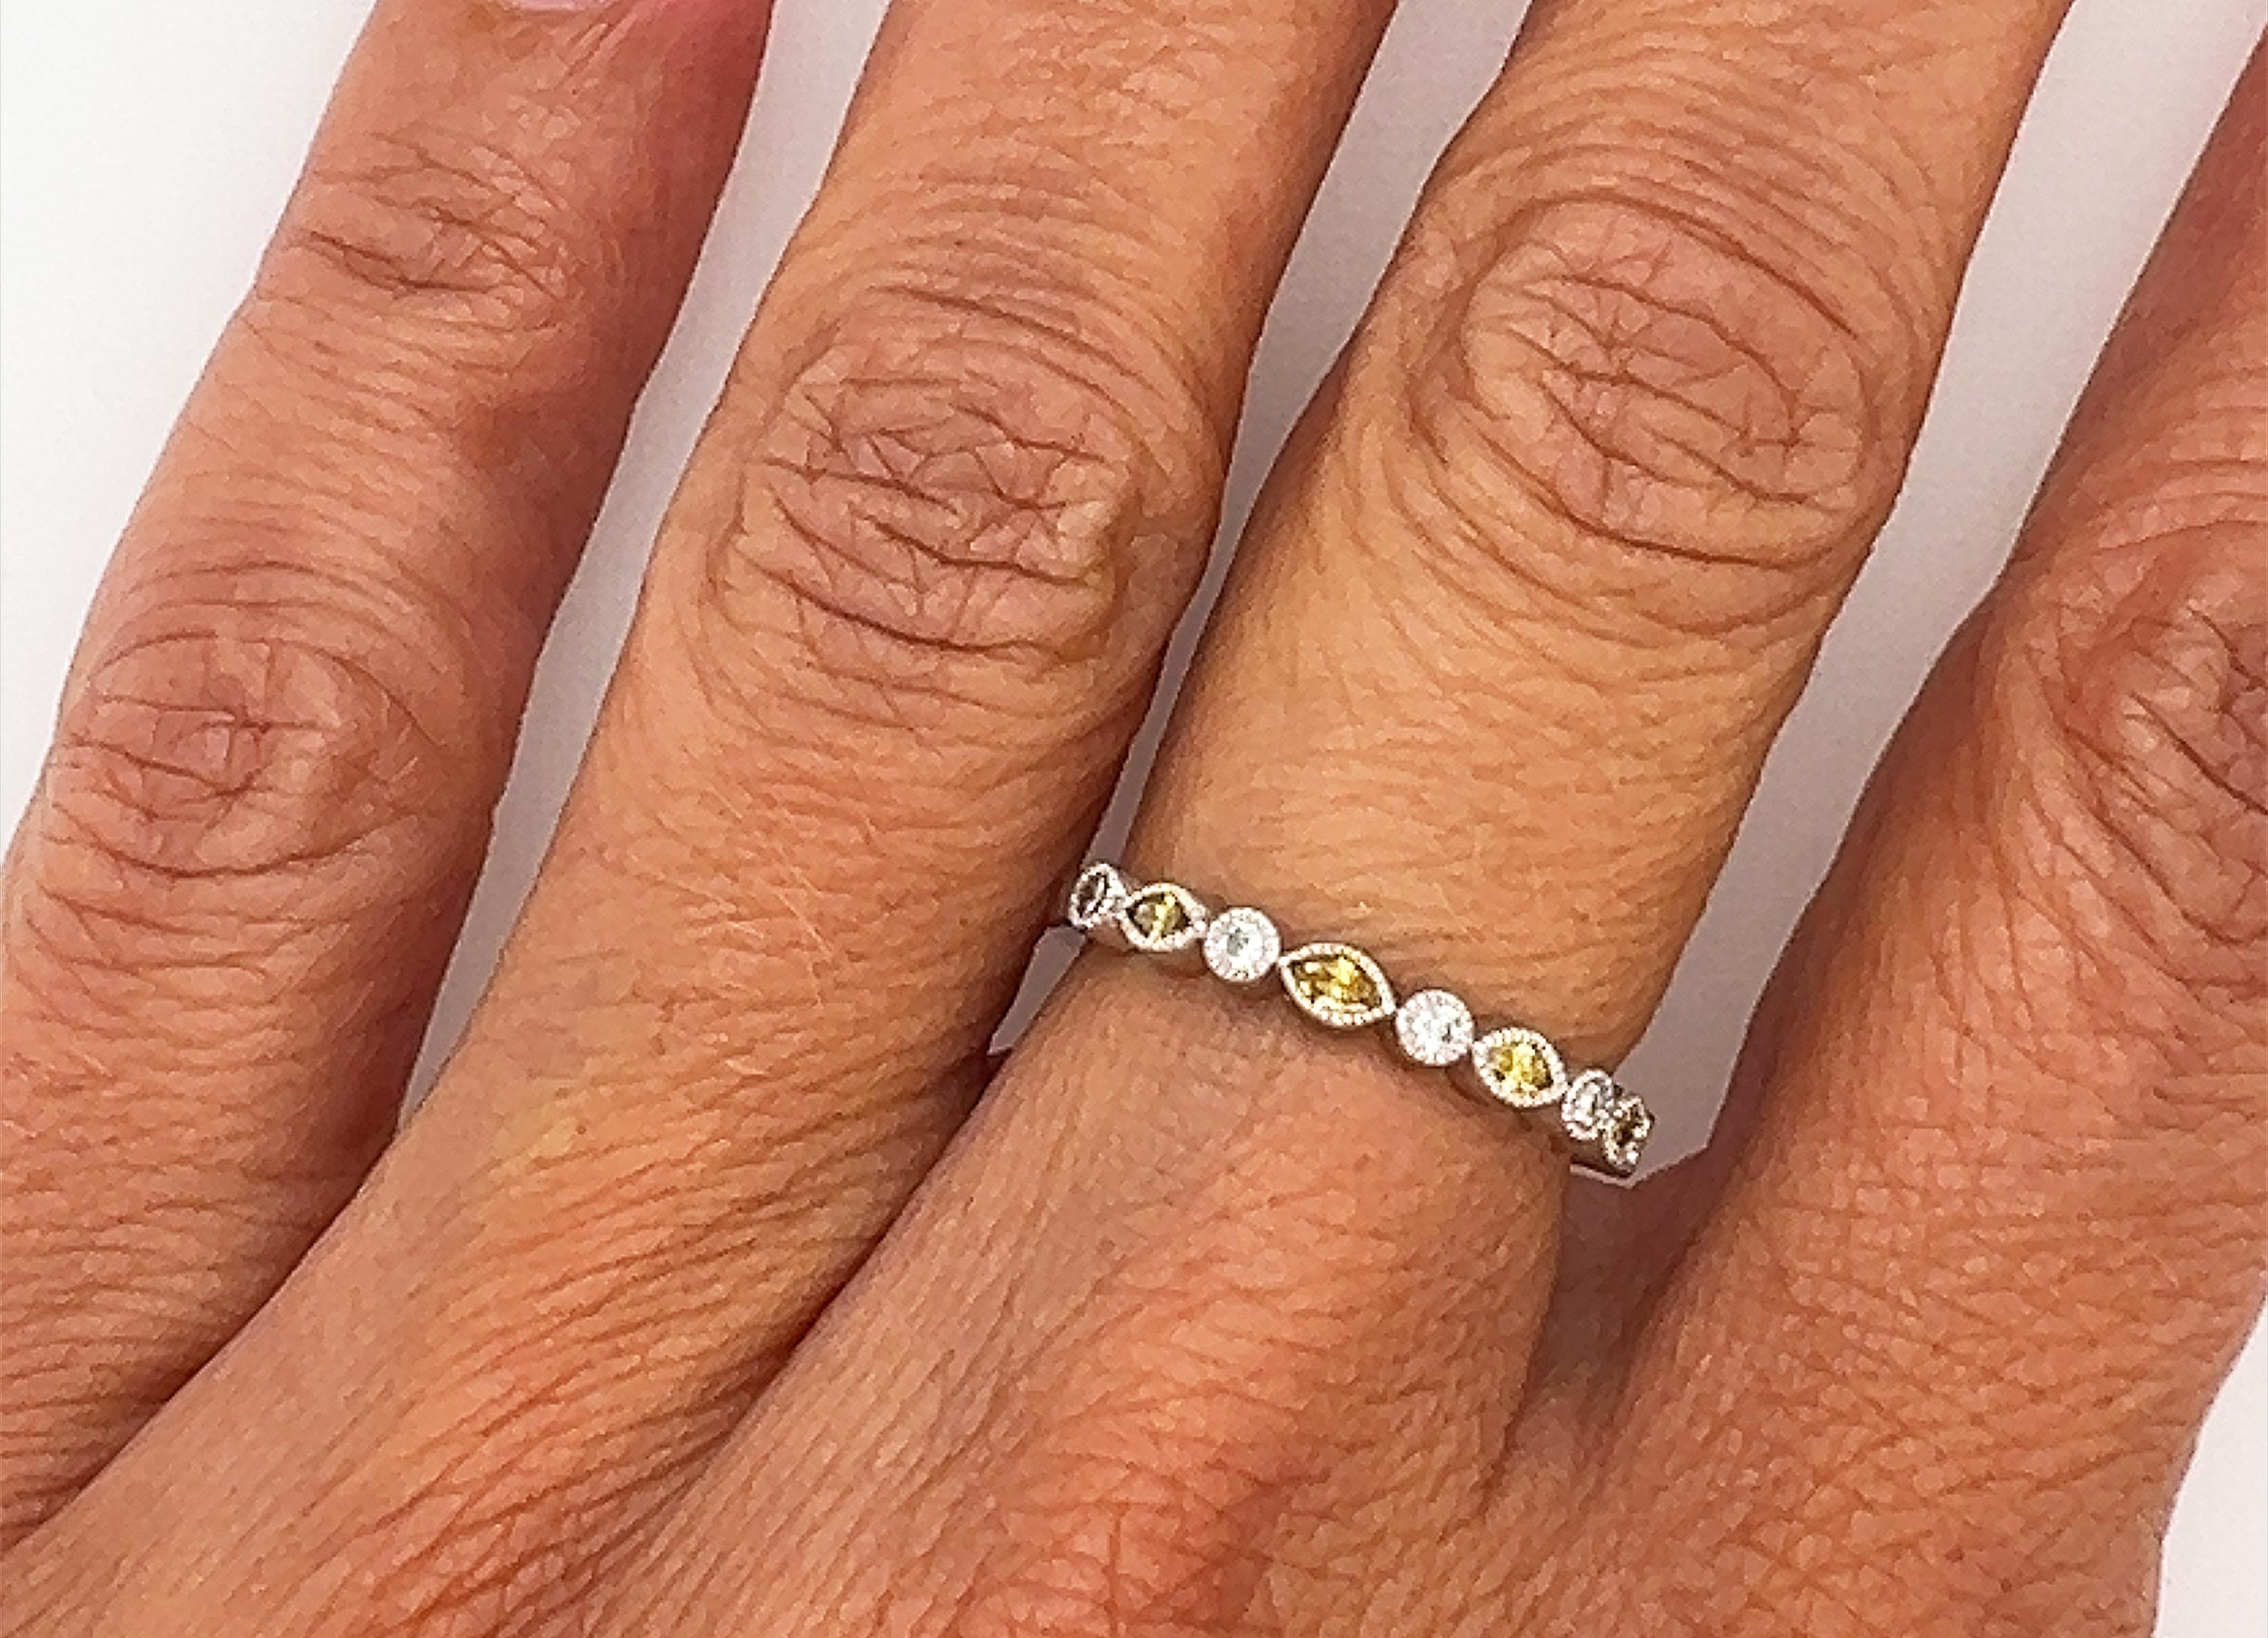 Brand New Anniversary Ring Alternating Pattern of Natural Fancy Vivid Deep Yellow Marquise Diamonds and Round Diamonds



Natural Mined Fancy Vivid Deep Yellow Diamonds Add Deep Rich Color 

Round Brilliant Diamonds Shimmer in Between

Great Band to